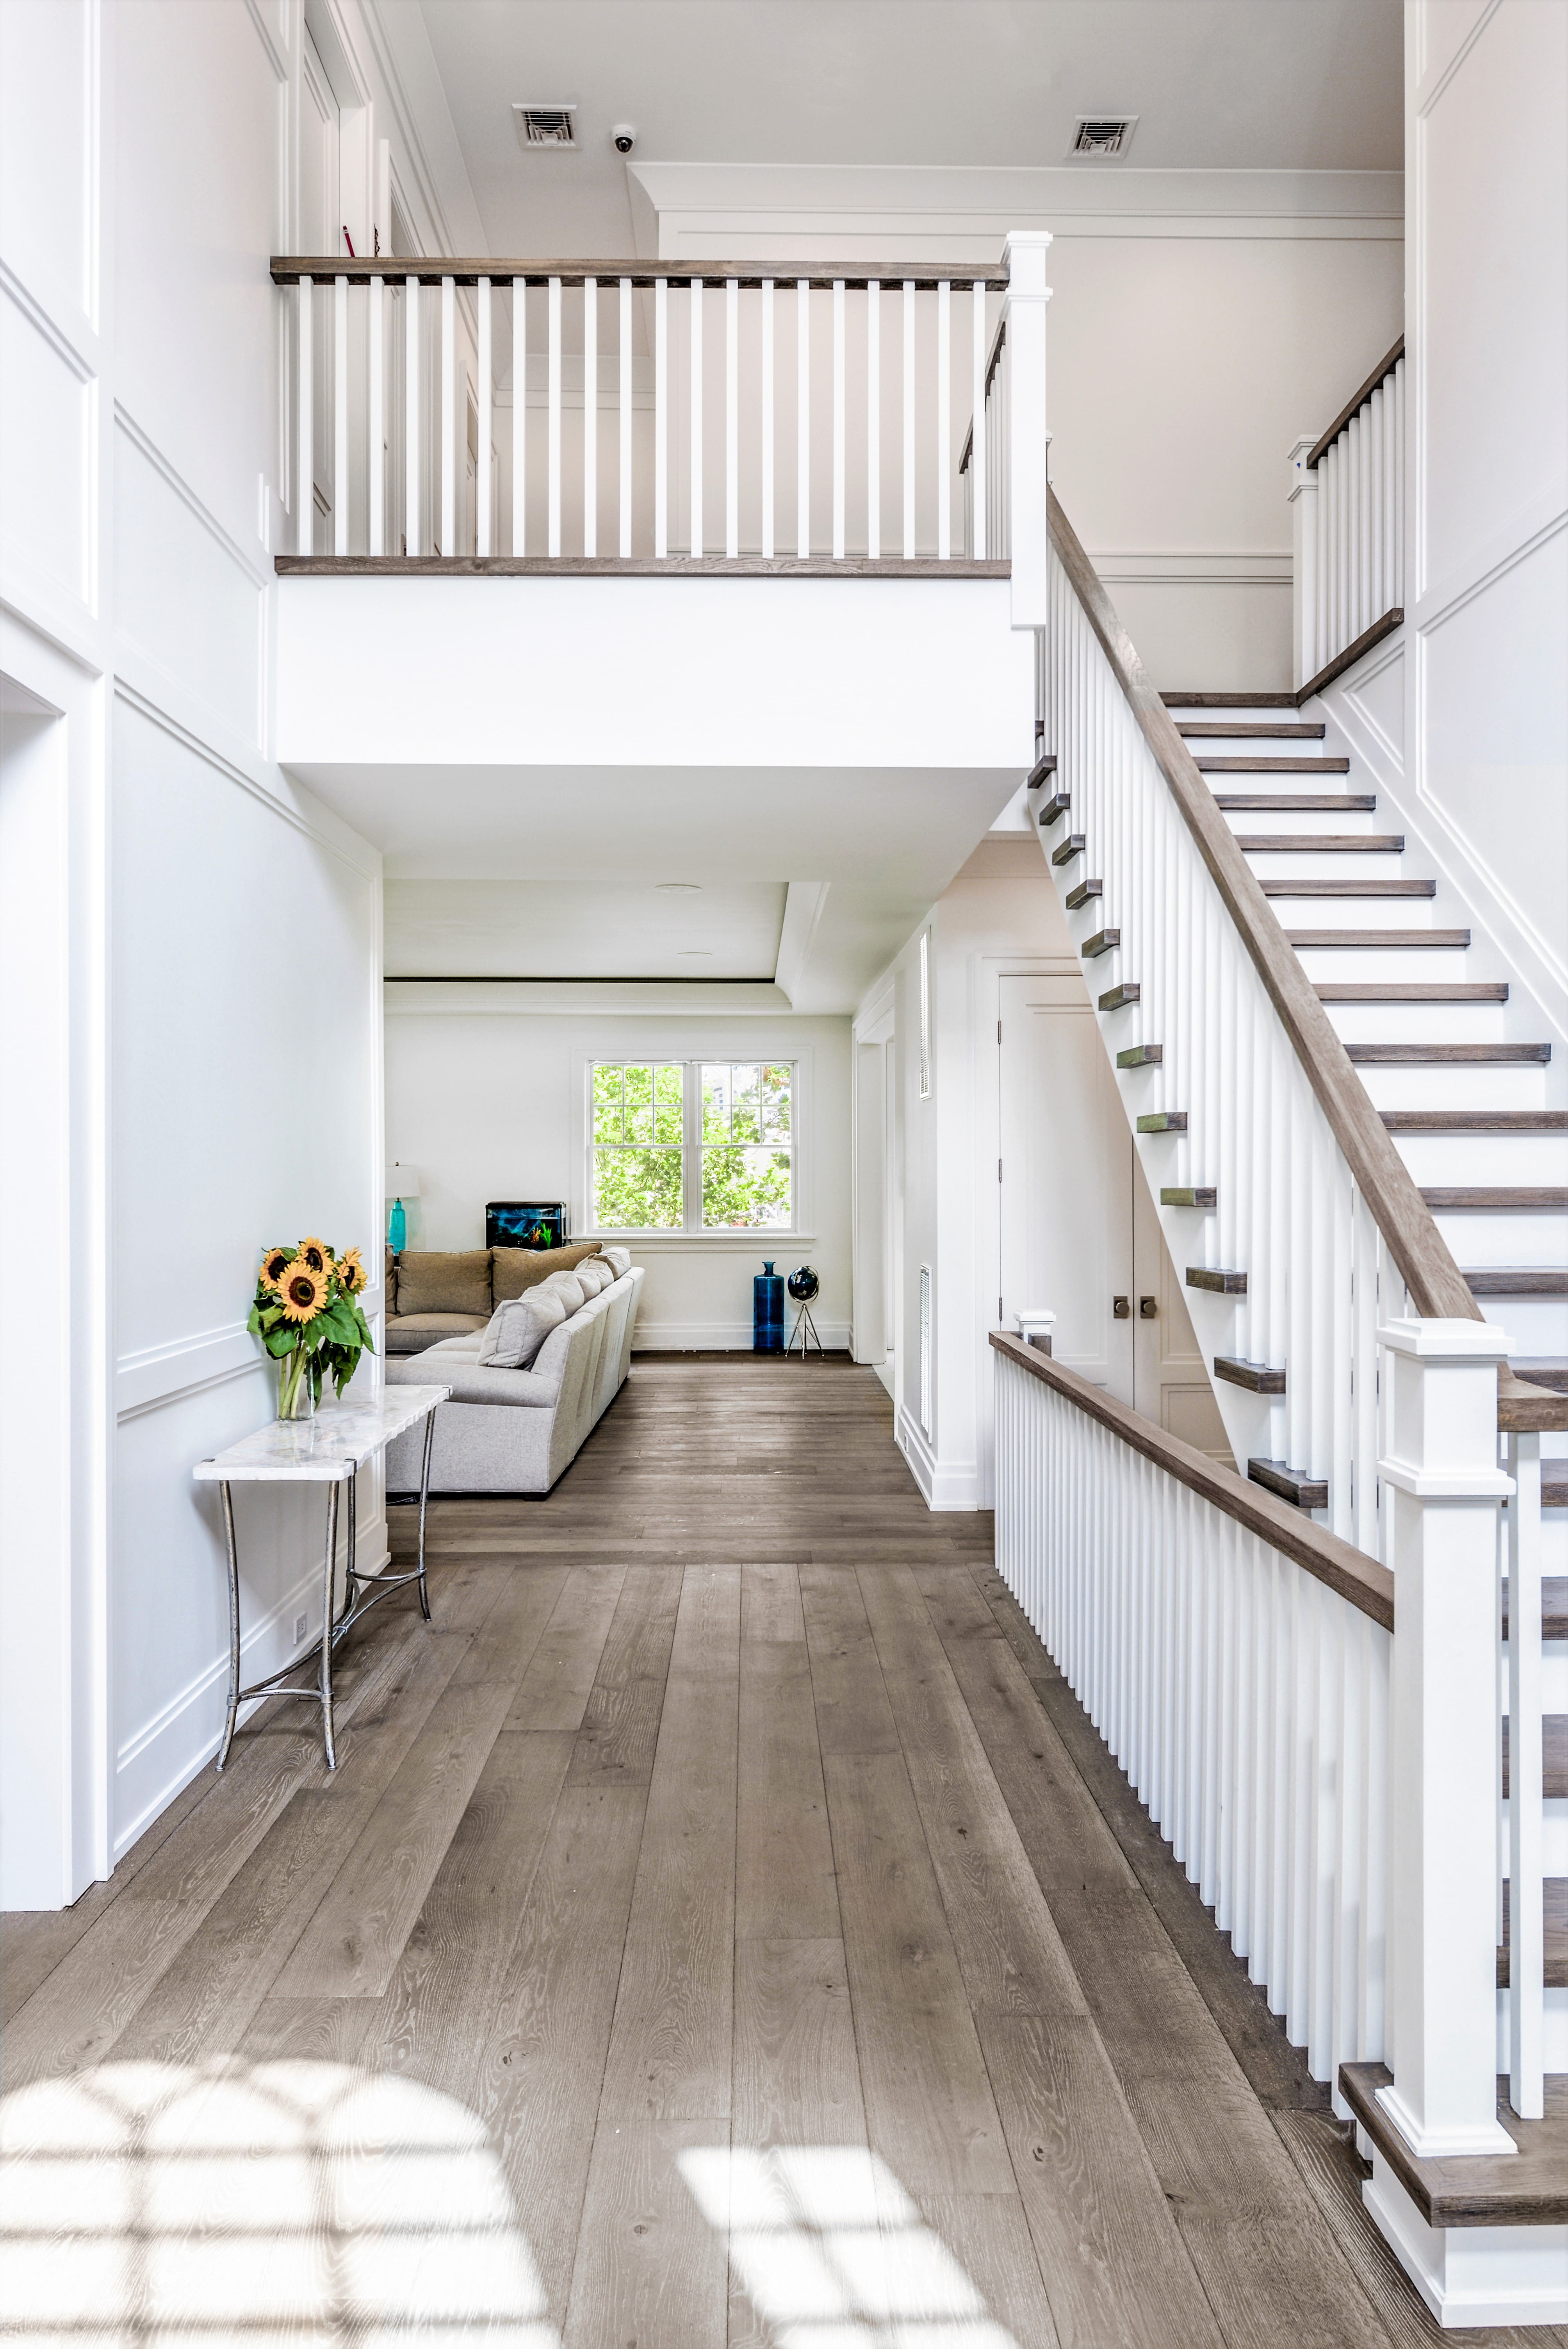 Entry Way and Staircase Design in the Hamptons